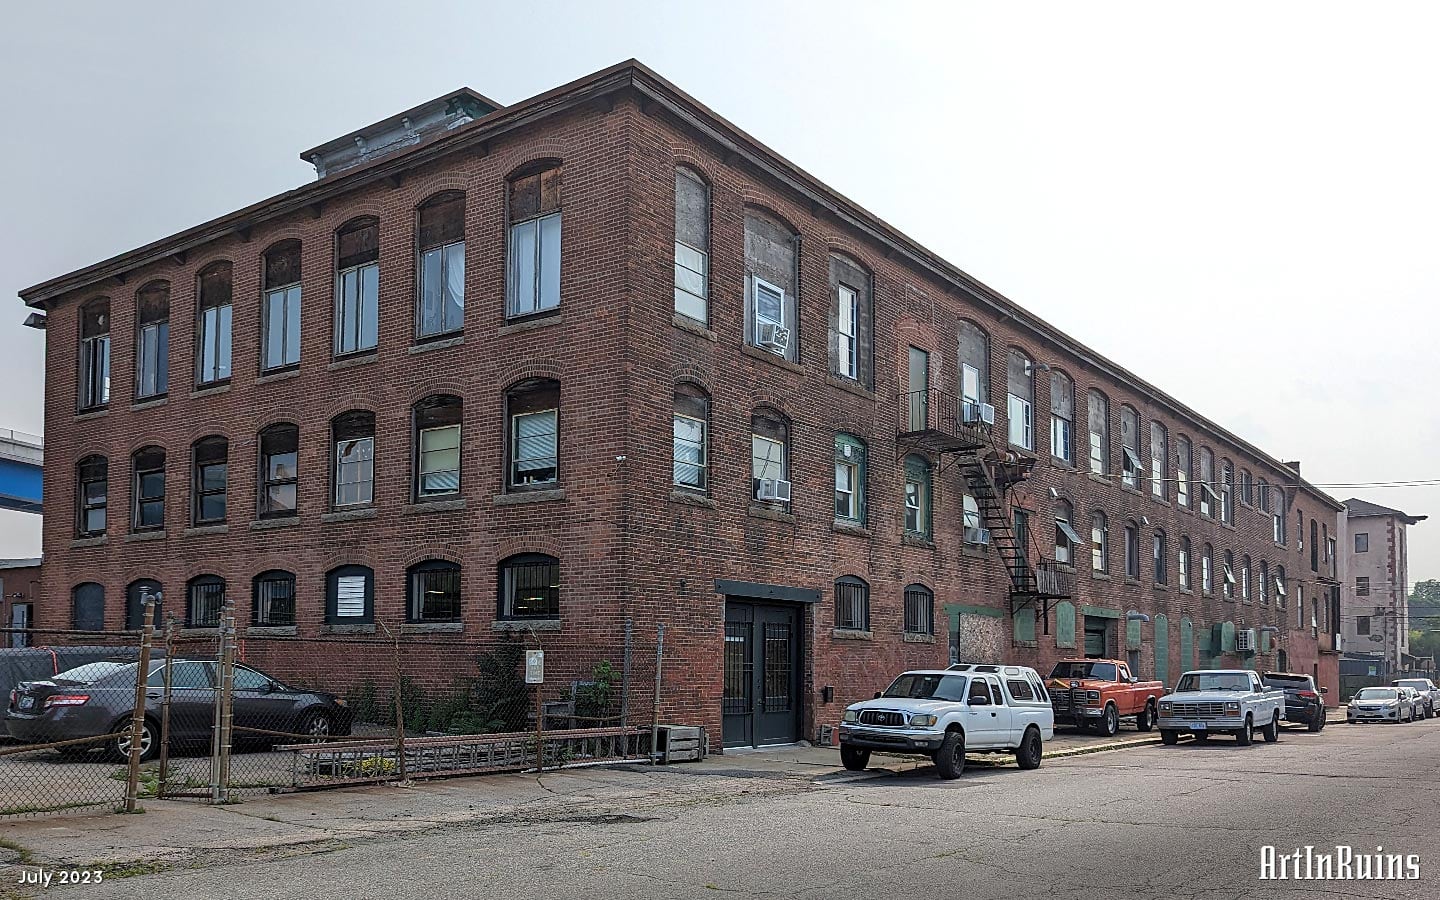 A large, three story red brick mill building with attached Boiler House and a raised monitor roof. An extensive architectural description is in the history section of the page.